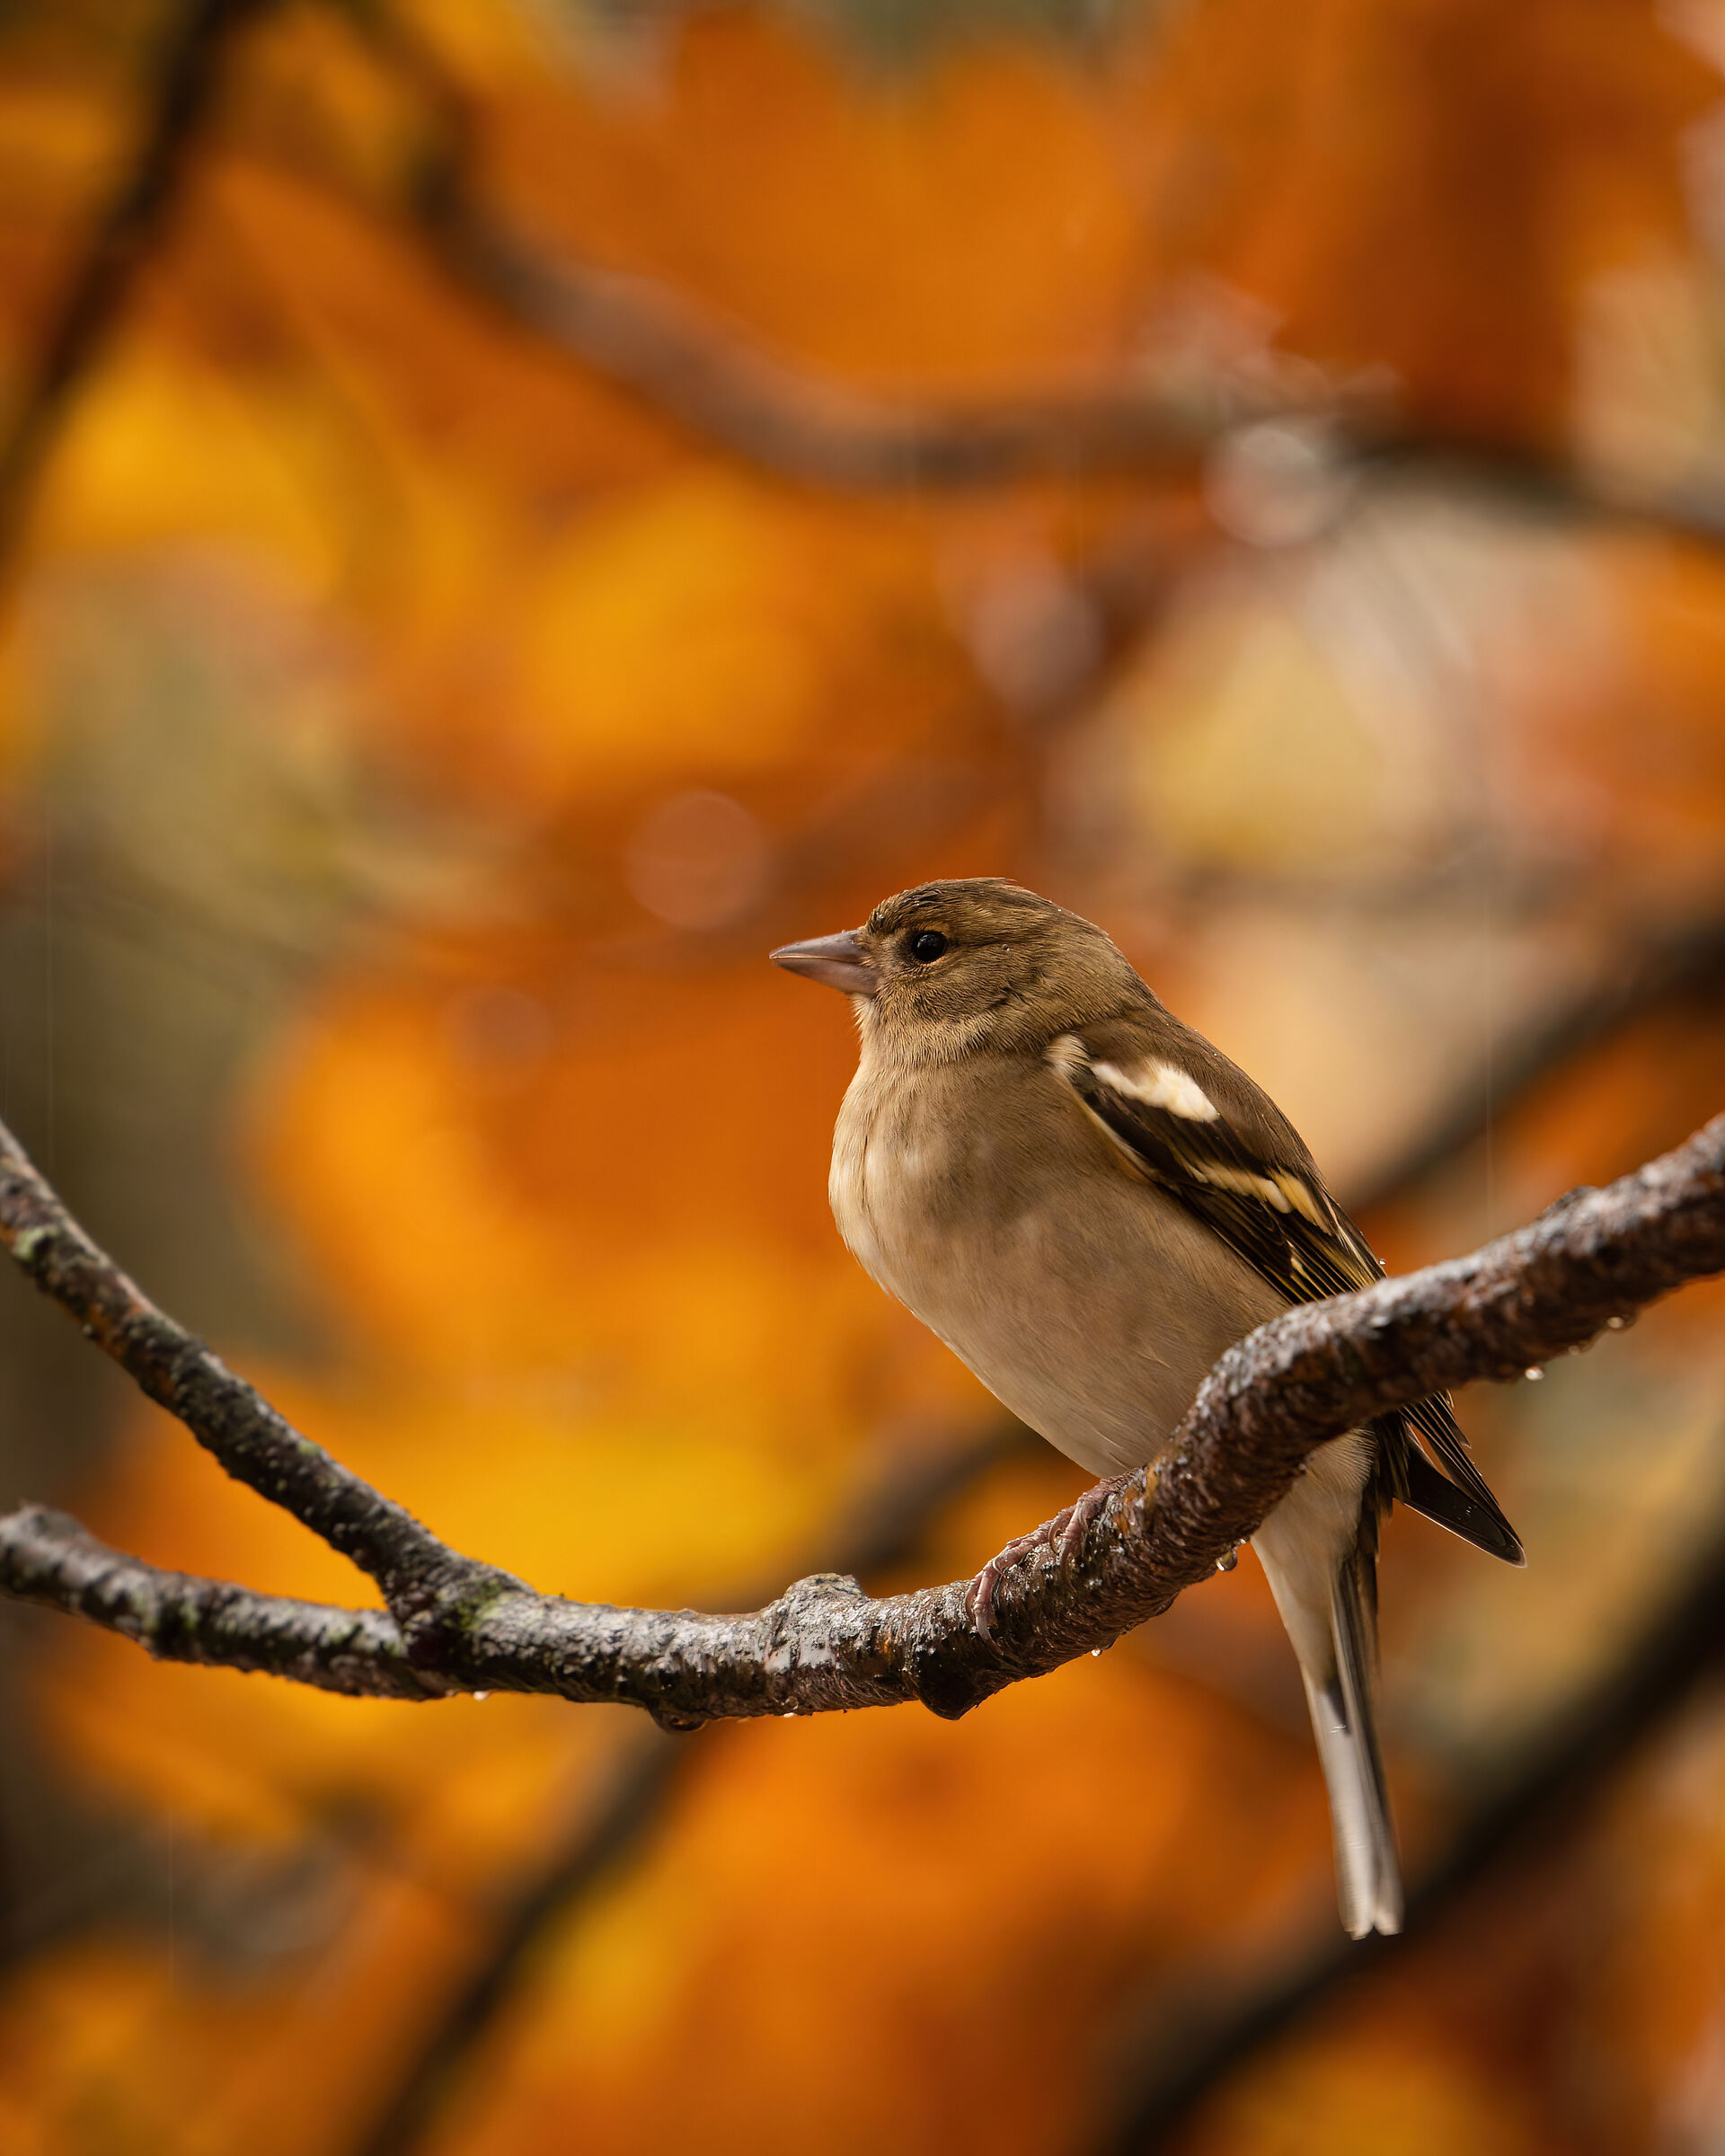 Female chaffinch immersed in autumn colors...